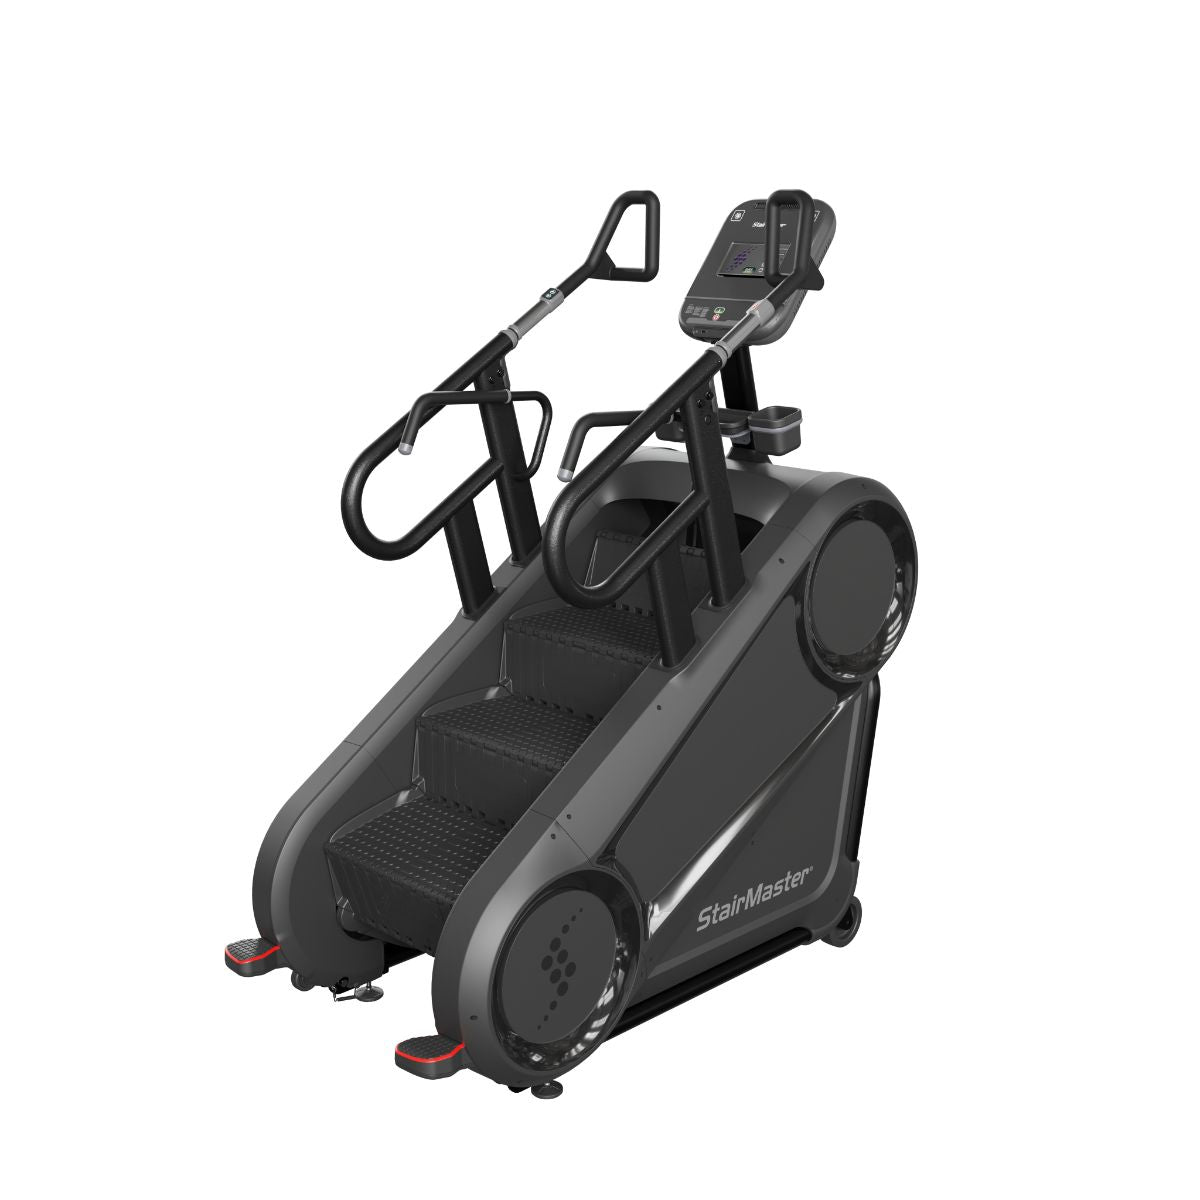 Stairmaster 10G Stair Climber